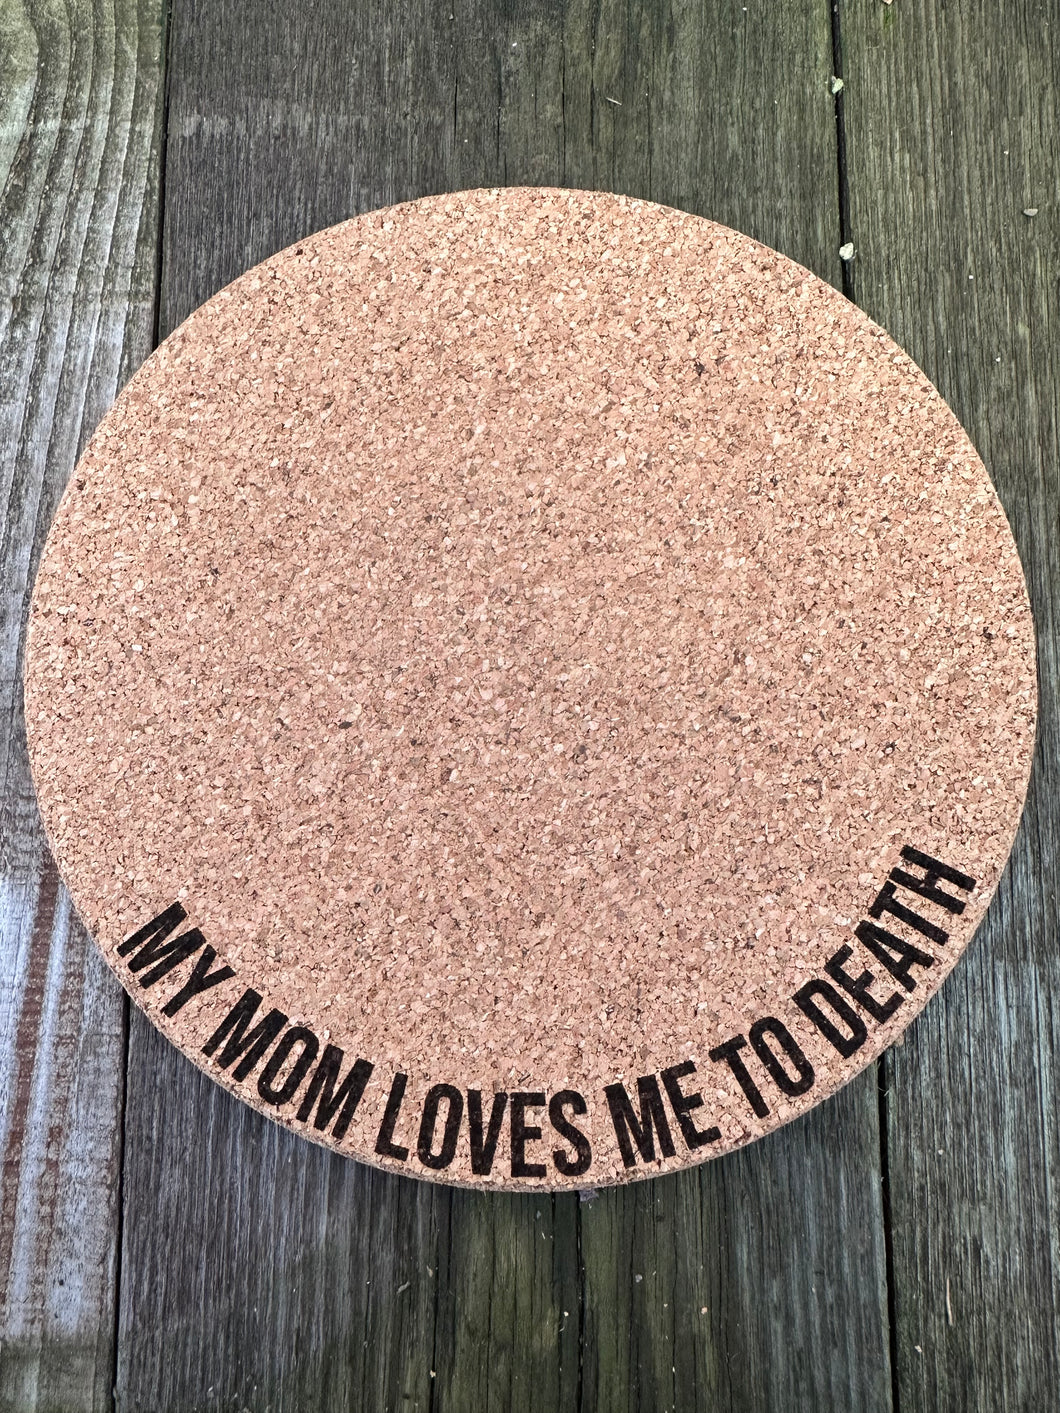 My Mom Loves Me To Death Cork Plant Mat - Engraved Cork Round - Cork Bottom - No Plastic or Rubber - All Natural Material